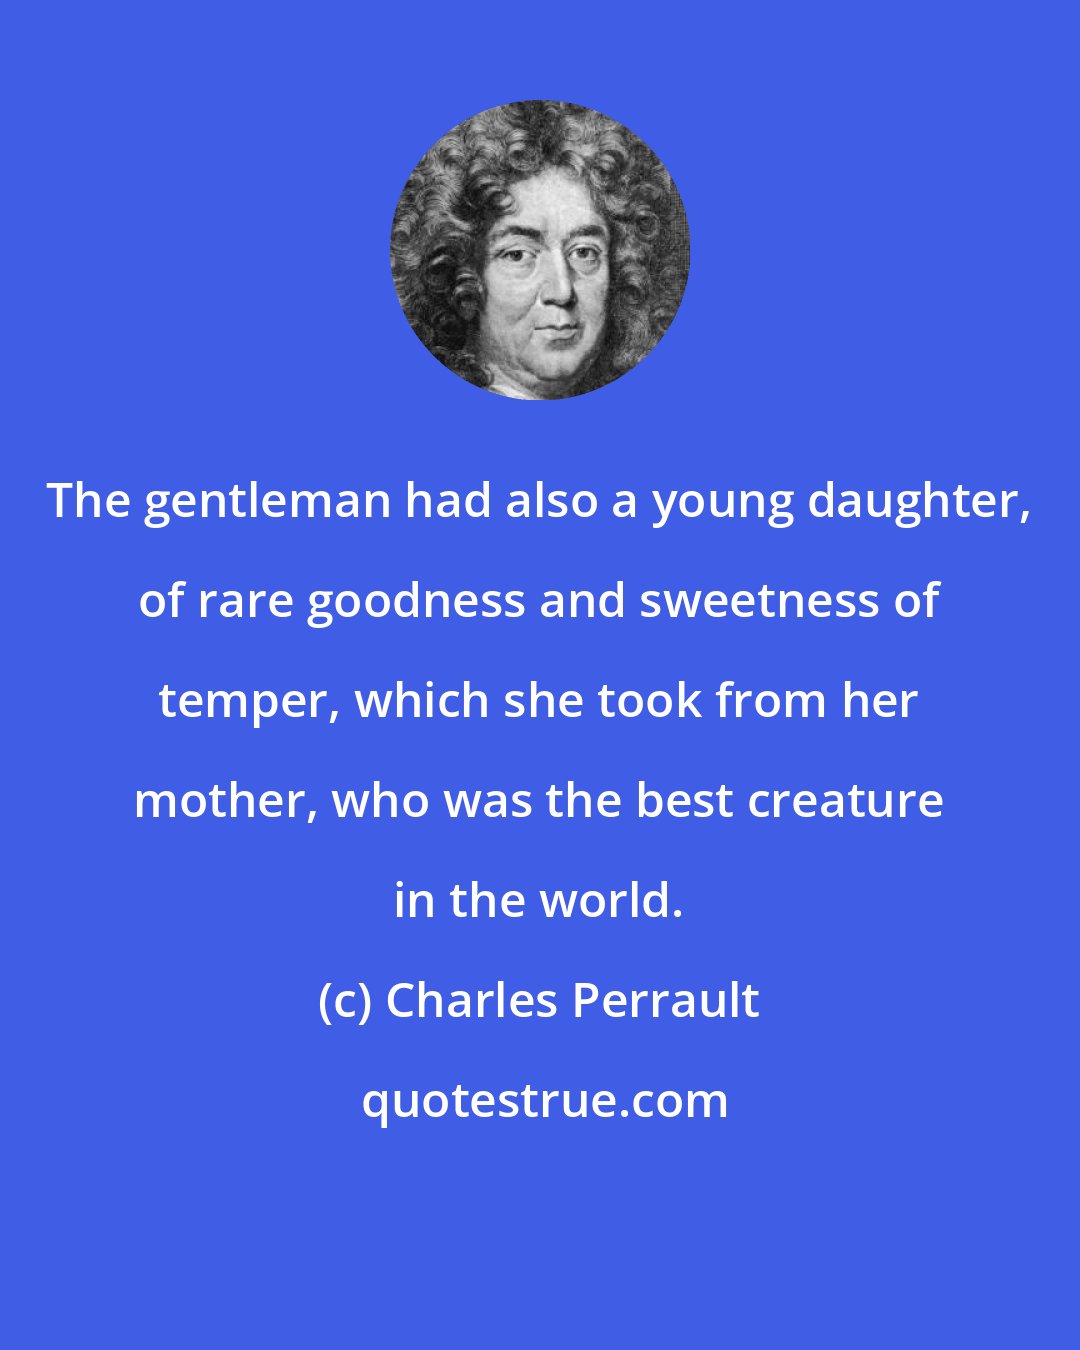 Charles Perrault: The gentleman had also a young daughter, of rare goodness and sweetness of temper, which she took from her mother, who was the best creature in the world.